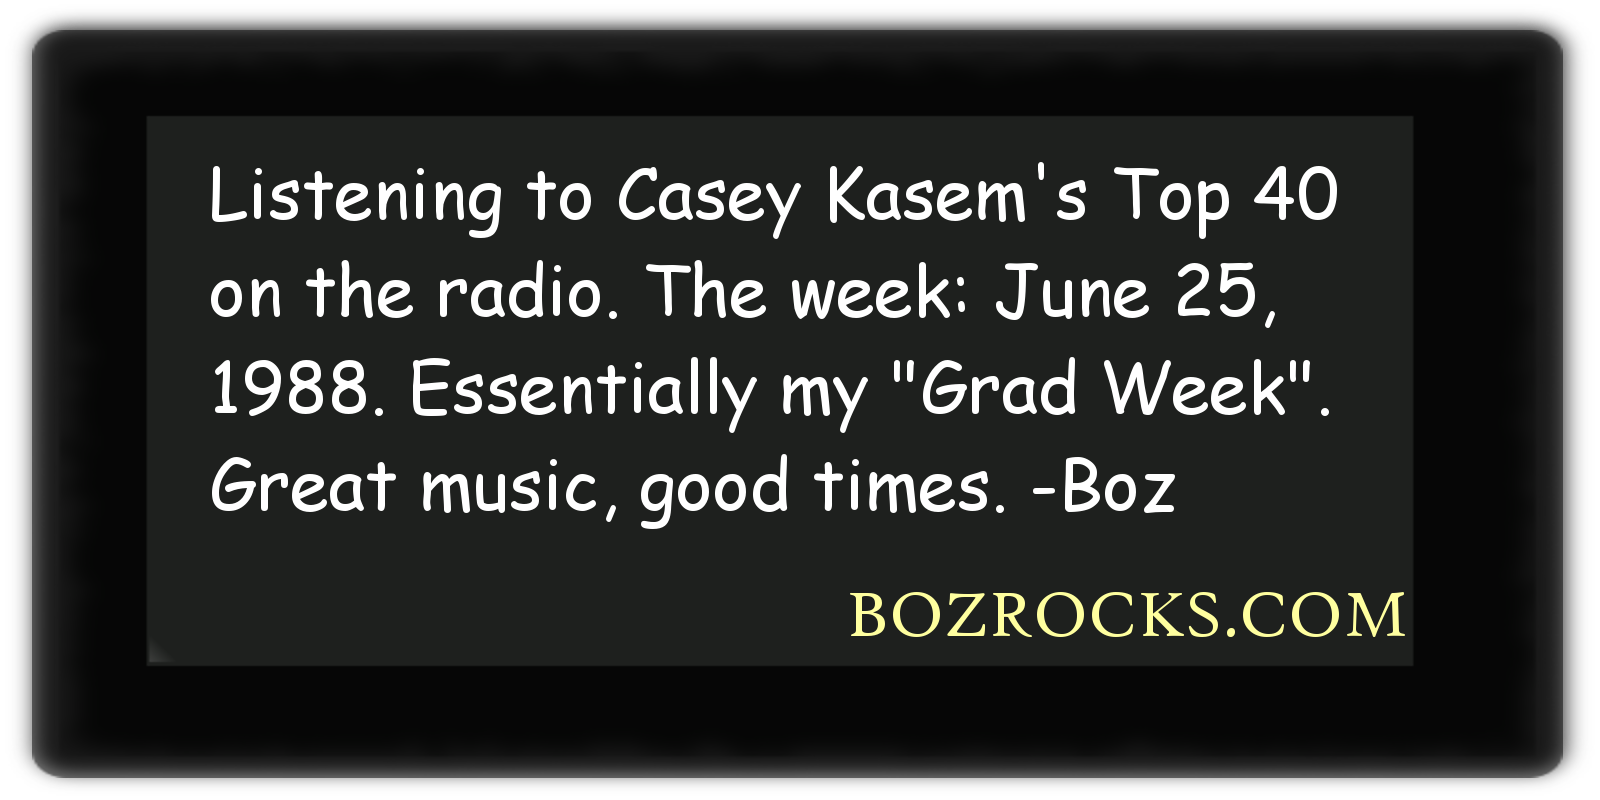 Listening to Casey Kasem’s Top 40 on the radio. The week: June 25, 1988. Essentially my Grad Week. Great music, good times.